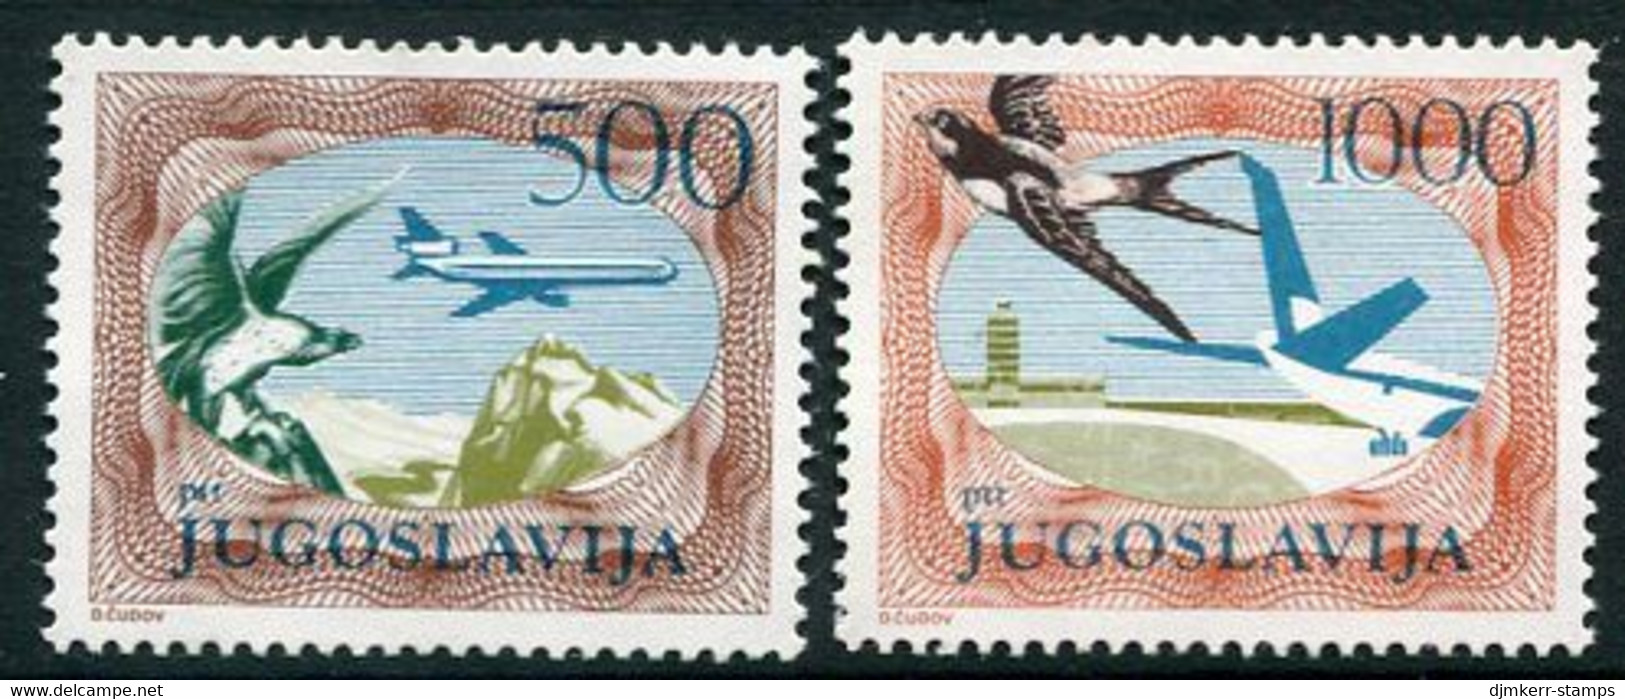 YUGOSLAVIA 1985 Airmail Definitive Perforated 12½ MNH / **.  Michel 2098-99A - Nuevos